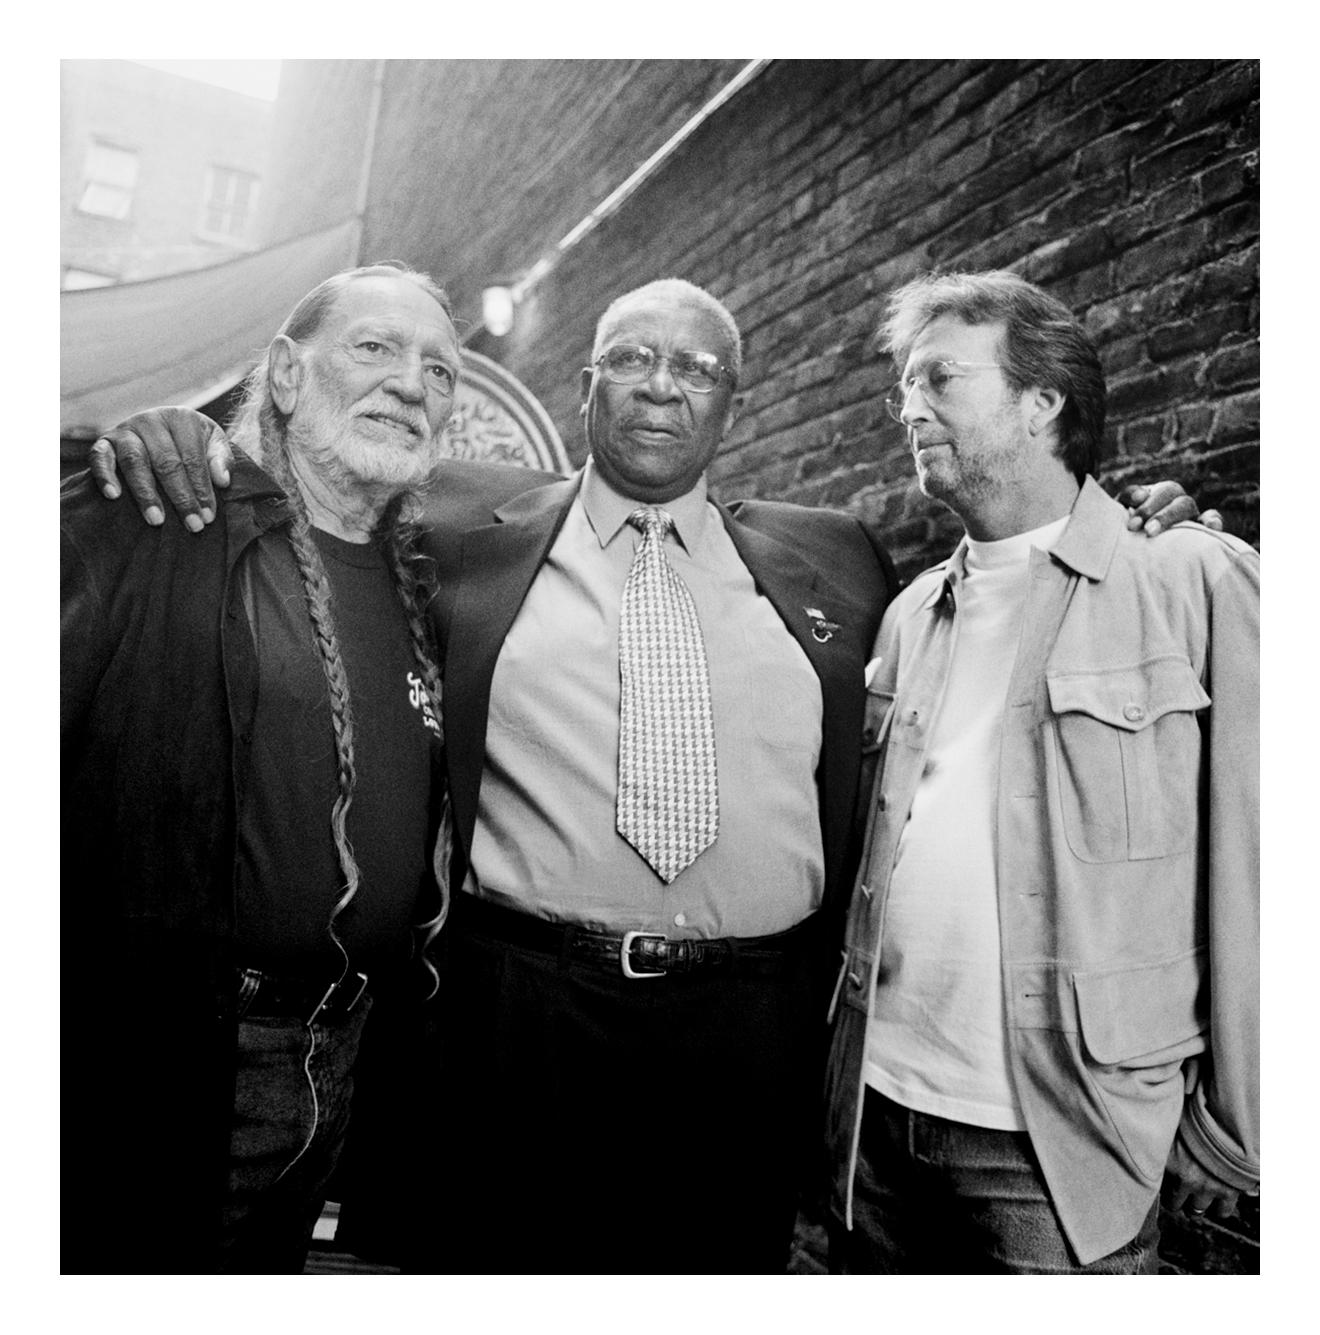 Jonathan Becker Black and White Photograph - Willie Nelson, B.B. King and Eric Clapton at the Apollo Theatre, Harlem, 2003